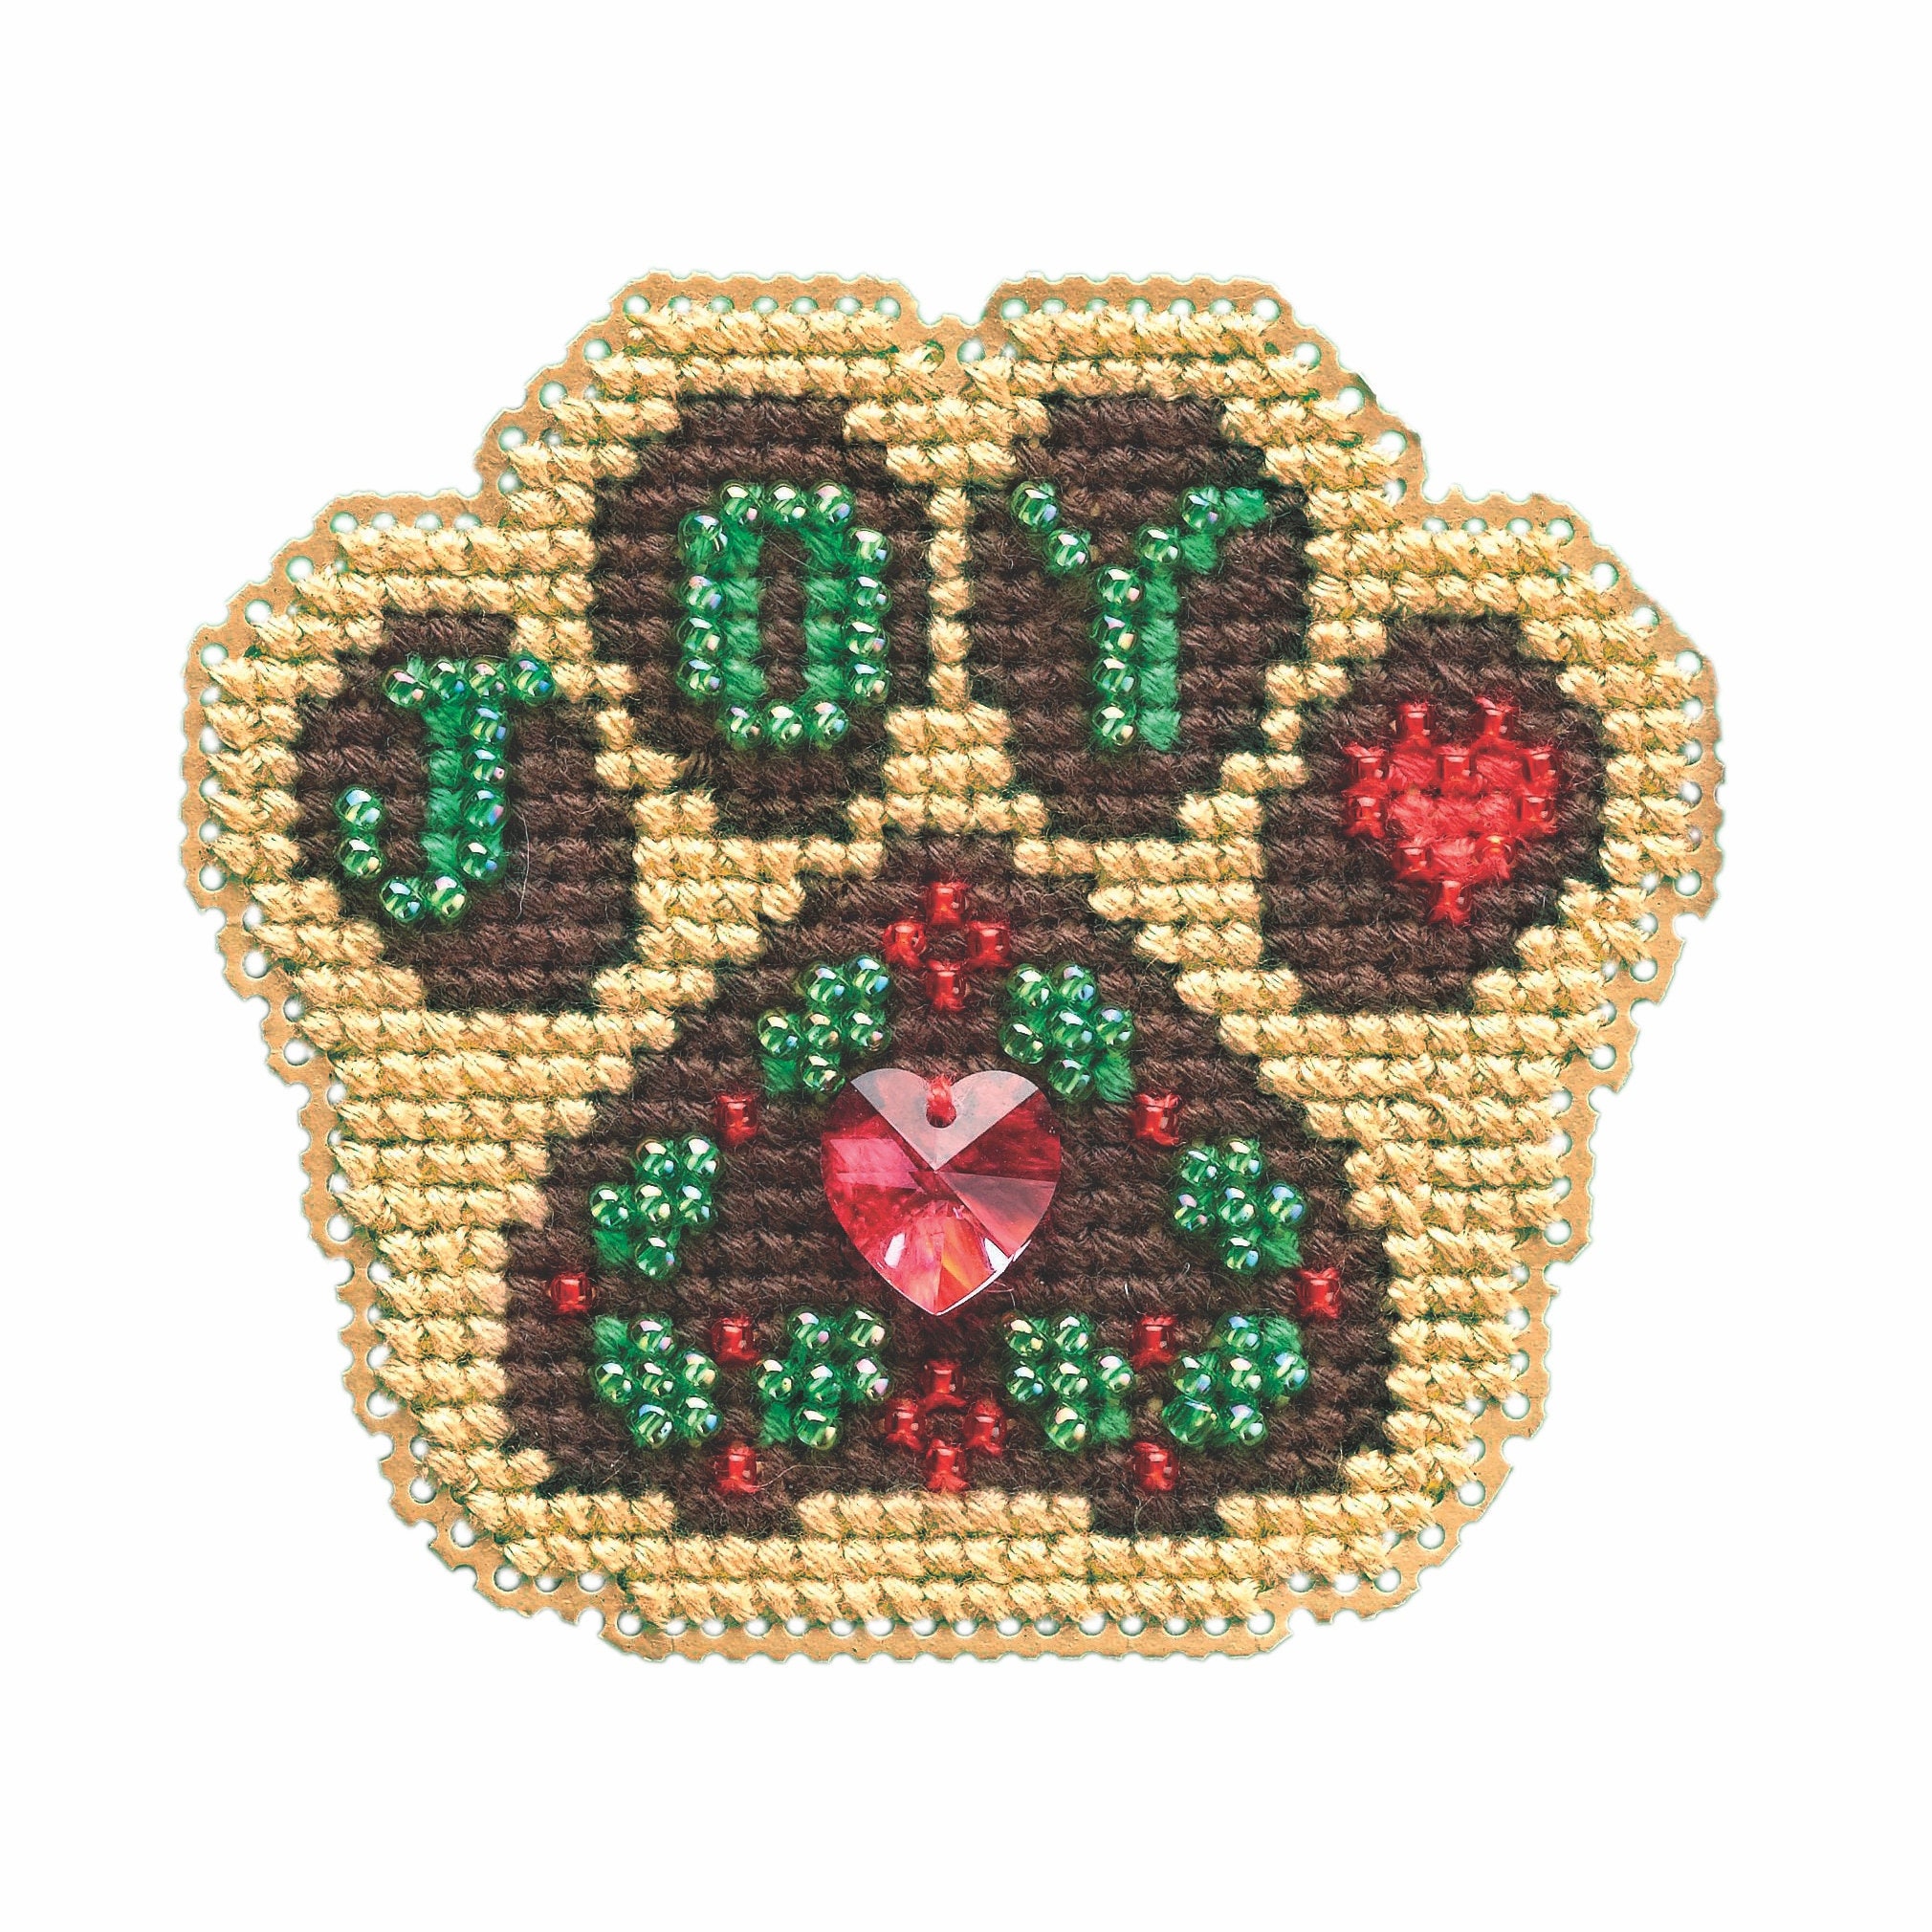 Gingerbread Lad Cross Stitch Ornament Kit Mill Hill 2021 Beaded Holiday  MH212111 